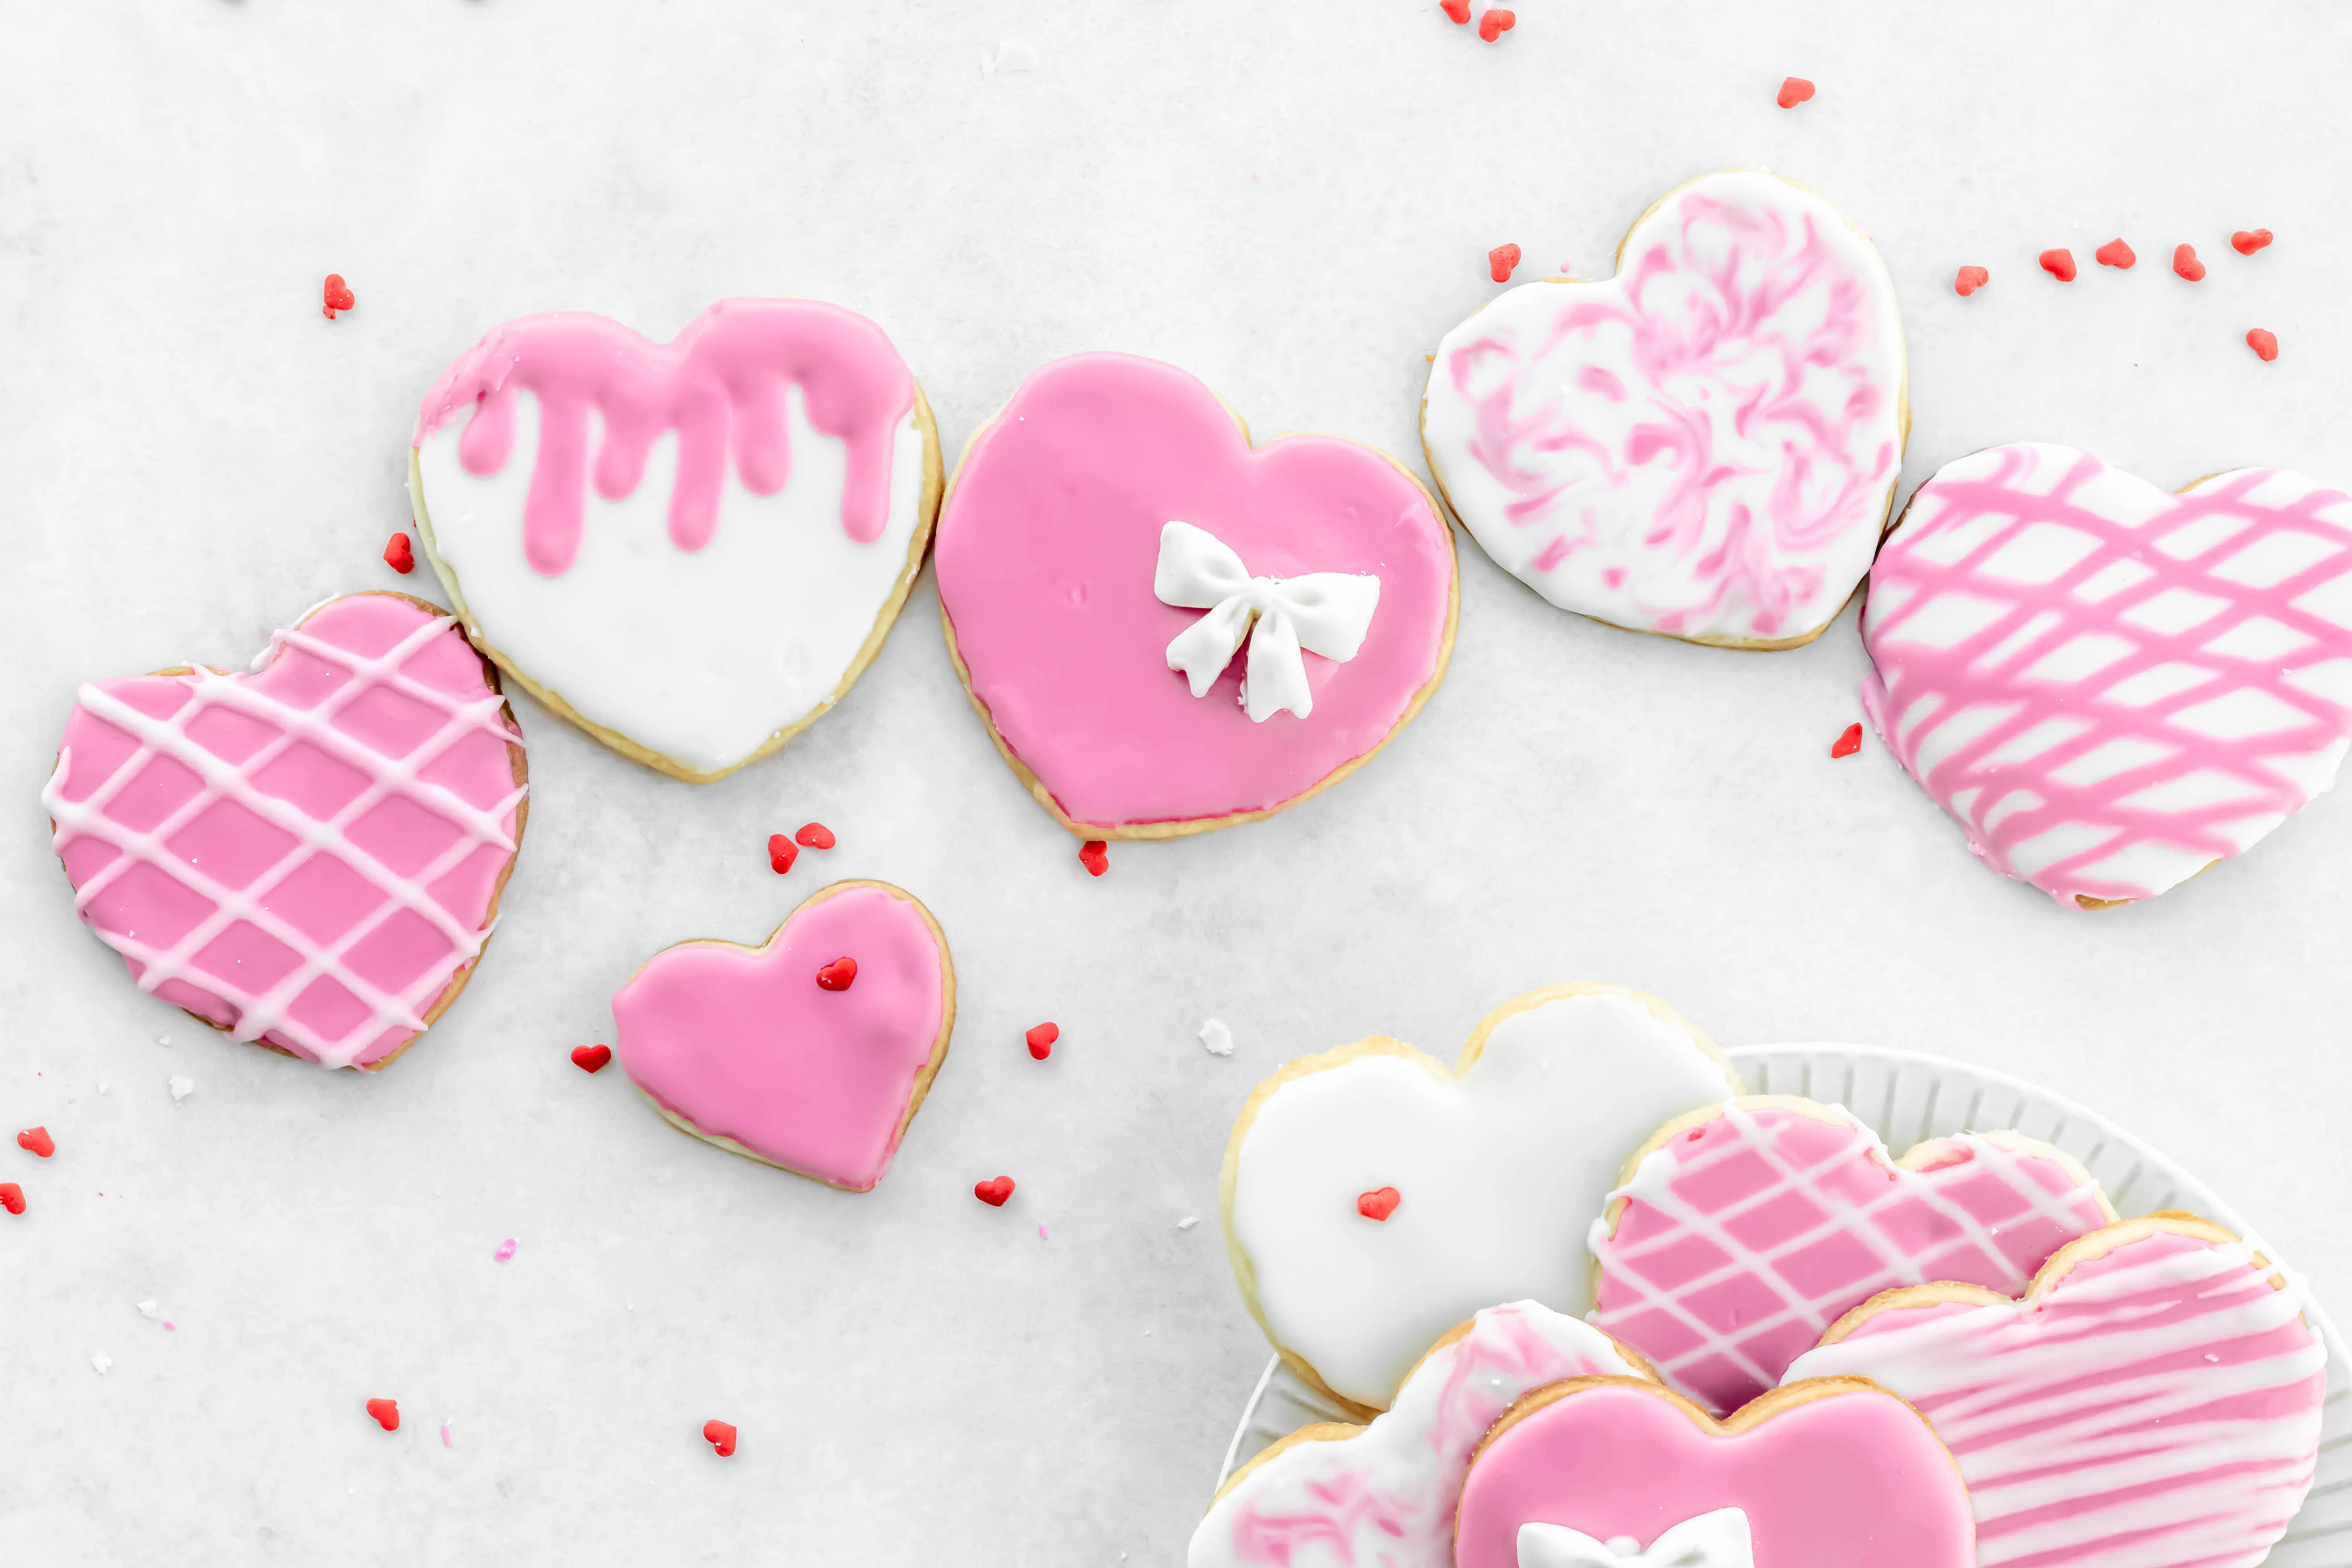 Sugar cookies for valentines day, heart shaped and iced in pink and white